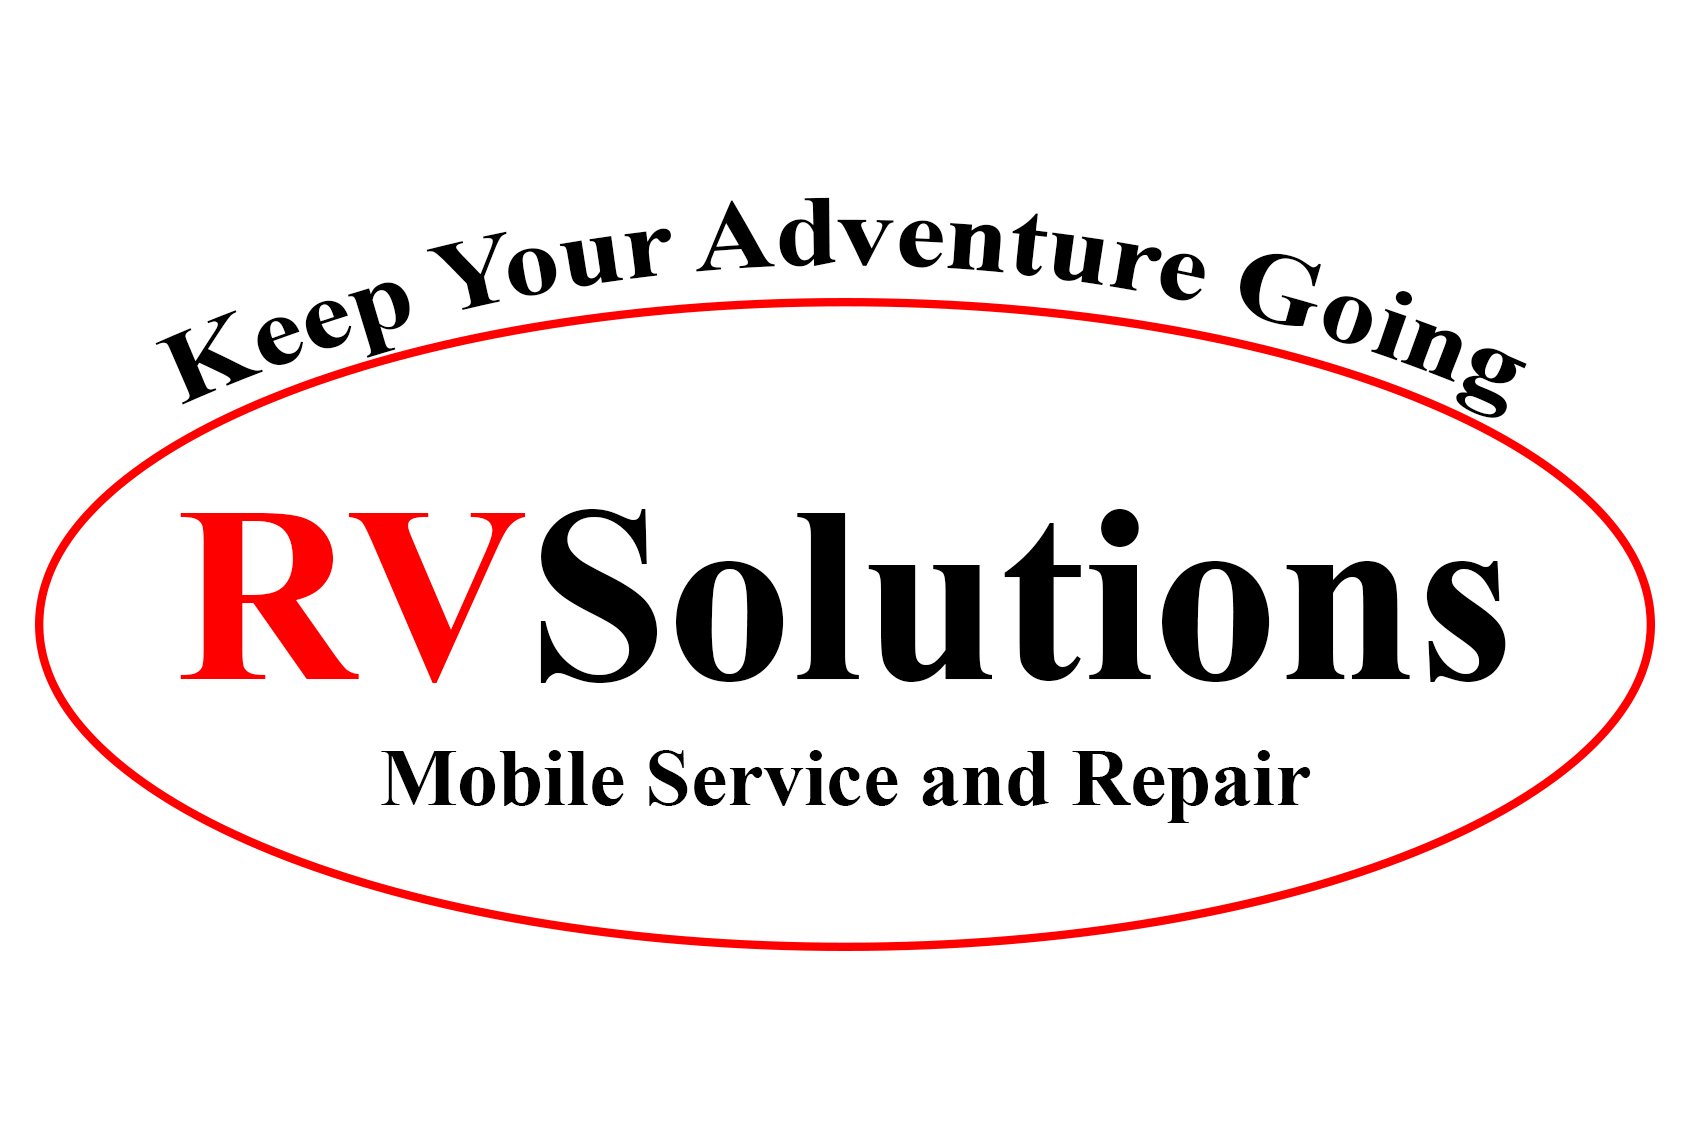 Replacement and Repair through RVS network of Service Centres across India.  - RV Solutions